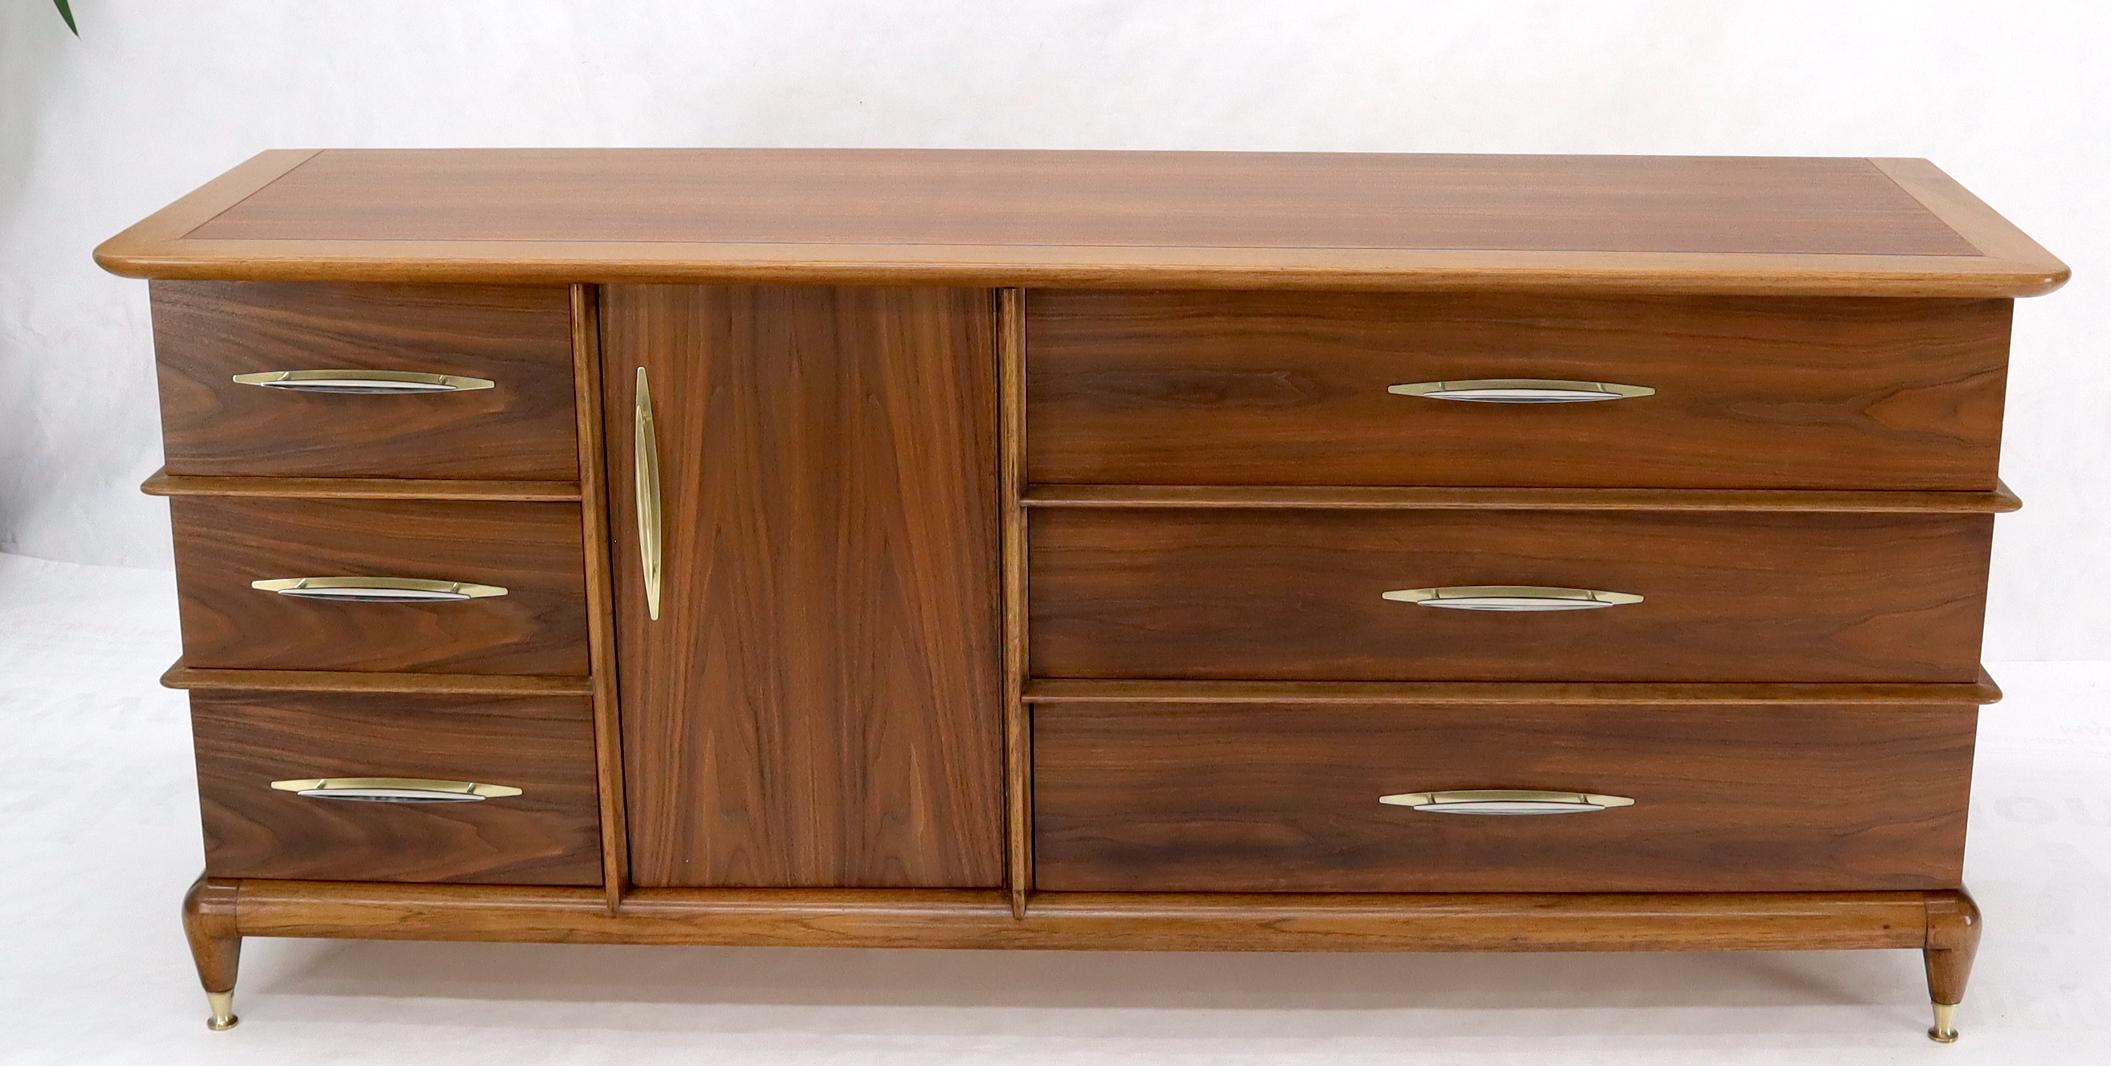 Lacquered Sculptural Walnut Mid-Century Modern Long Dresser Credenza For Sale